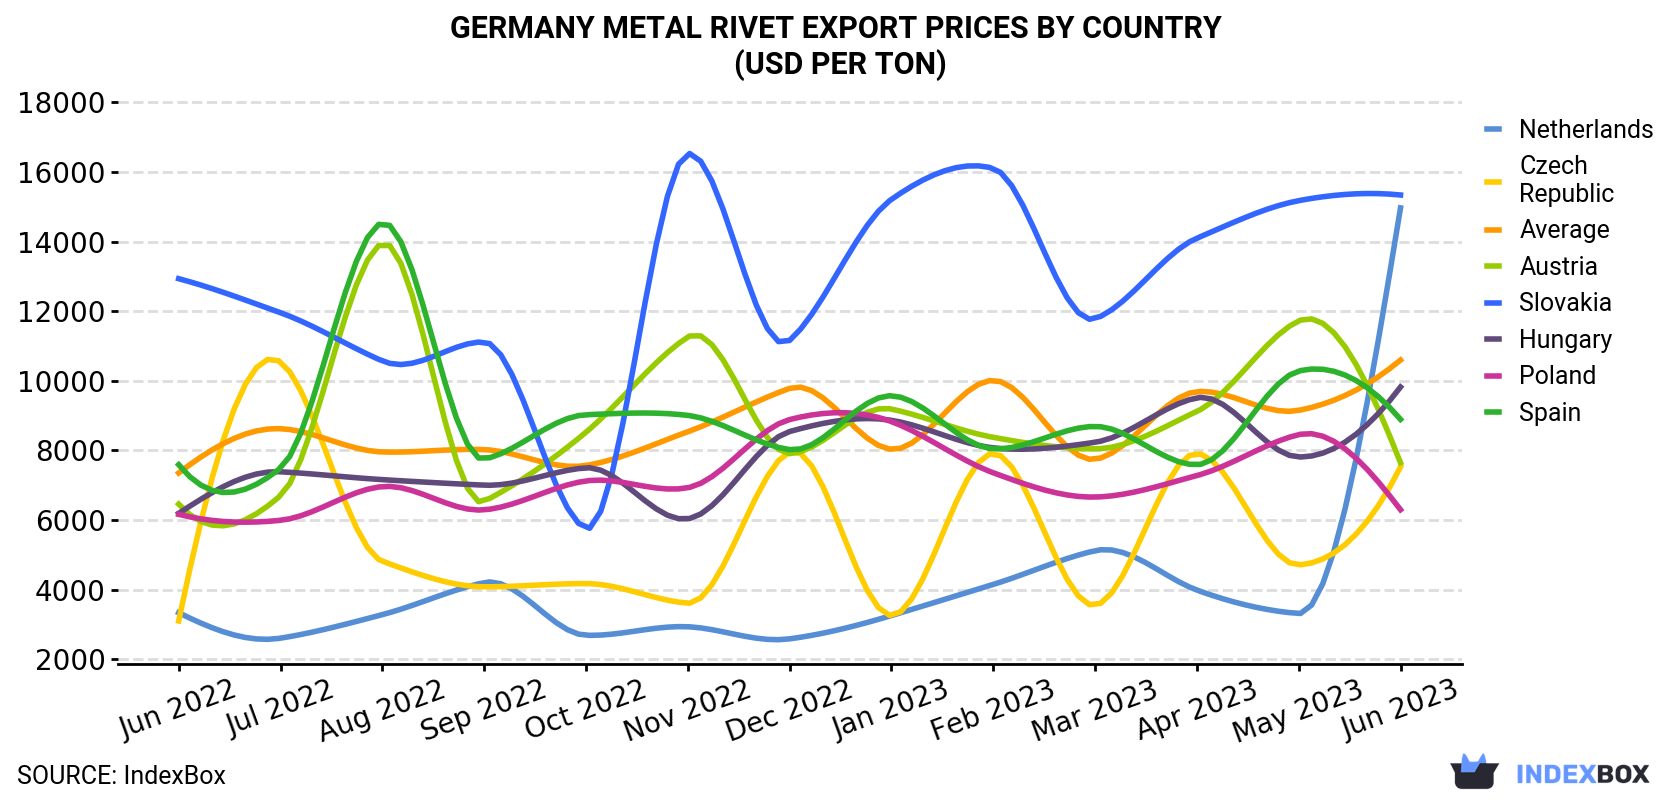 Germany Metal Rivet Export Prices By Country (USD Per Ton)